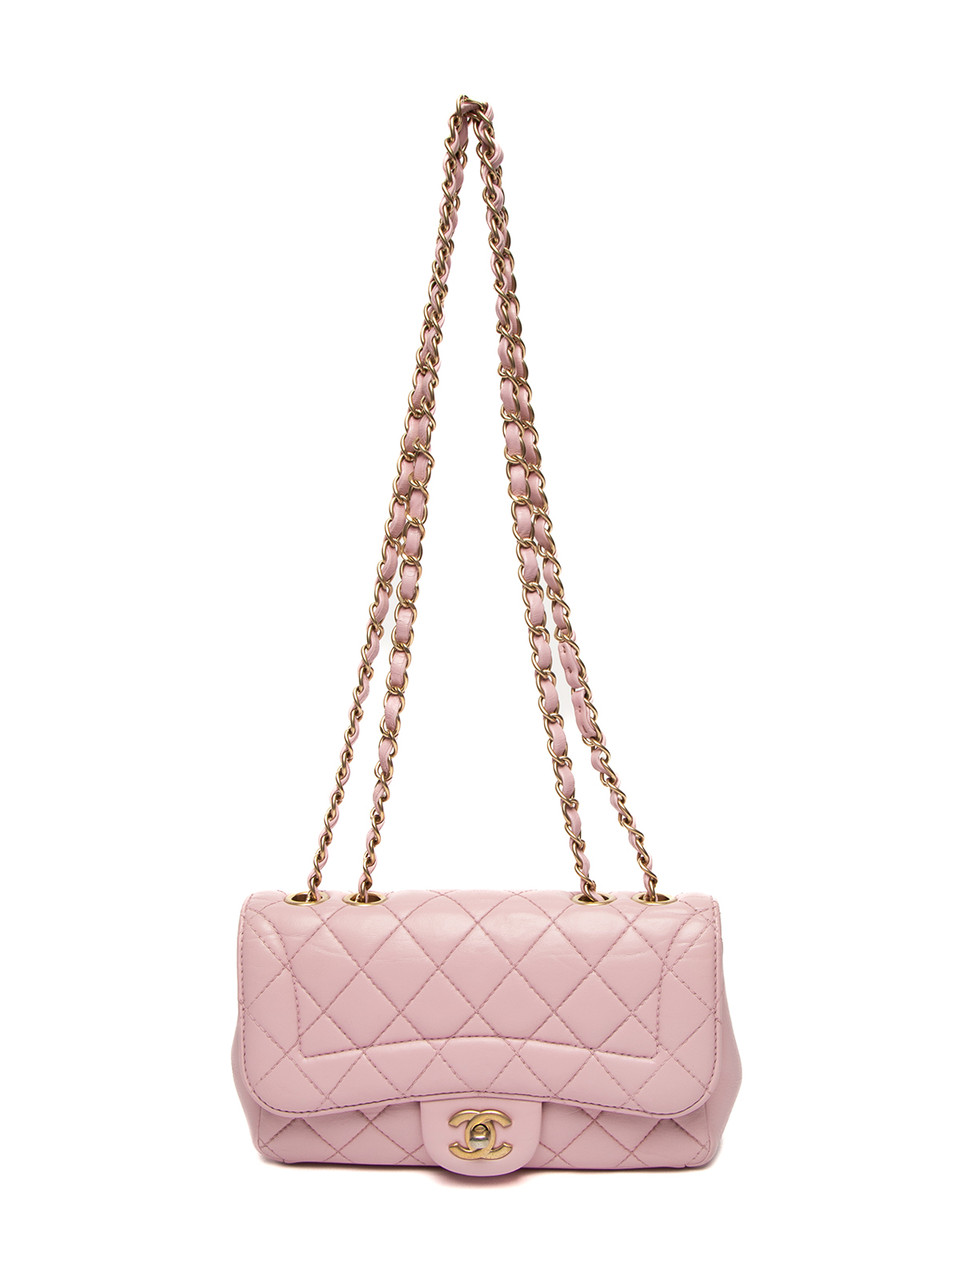 Chanel Mini Overstitch Baby Pink Flap Bag with Gold Hardware